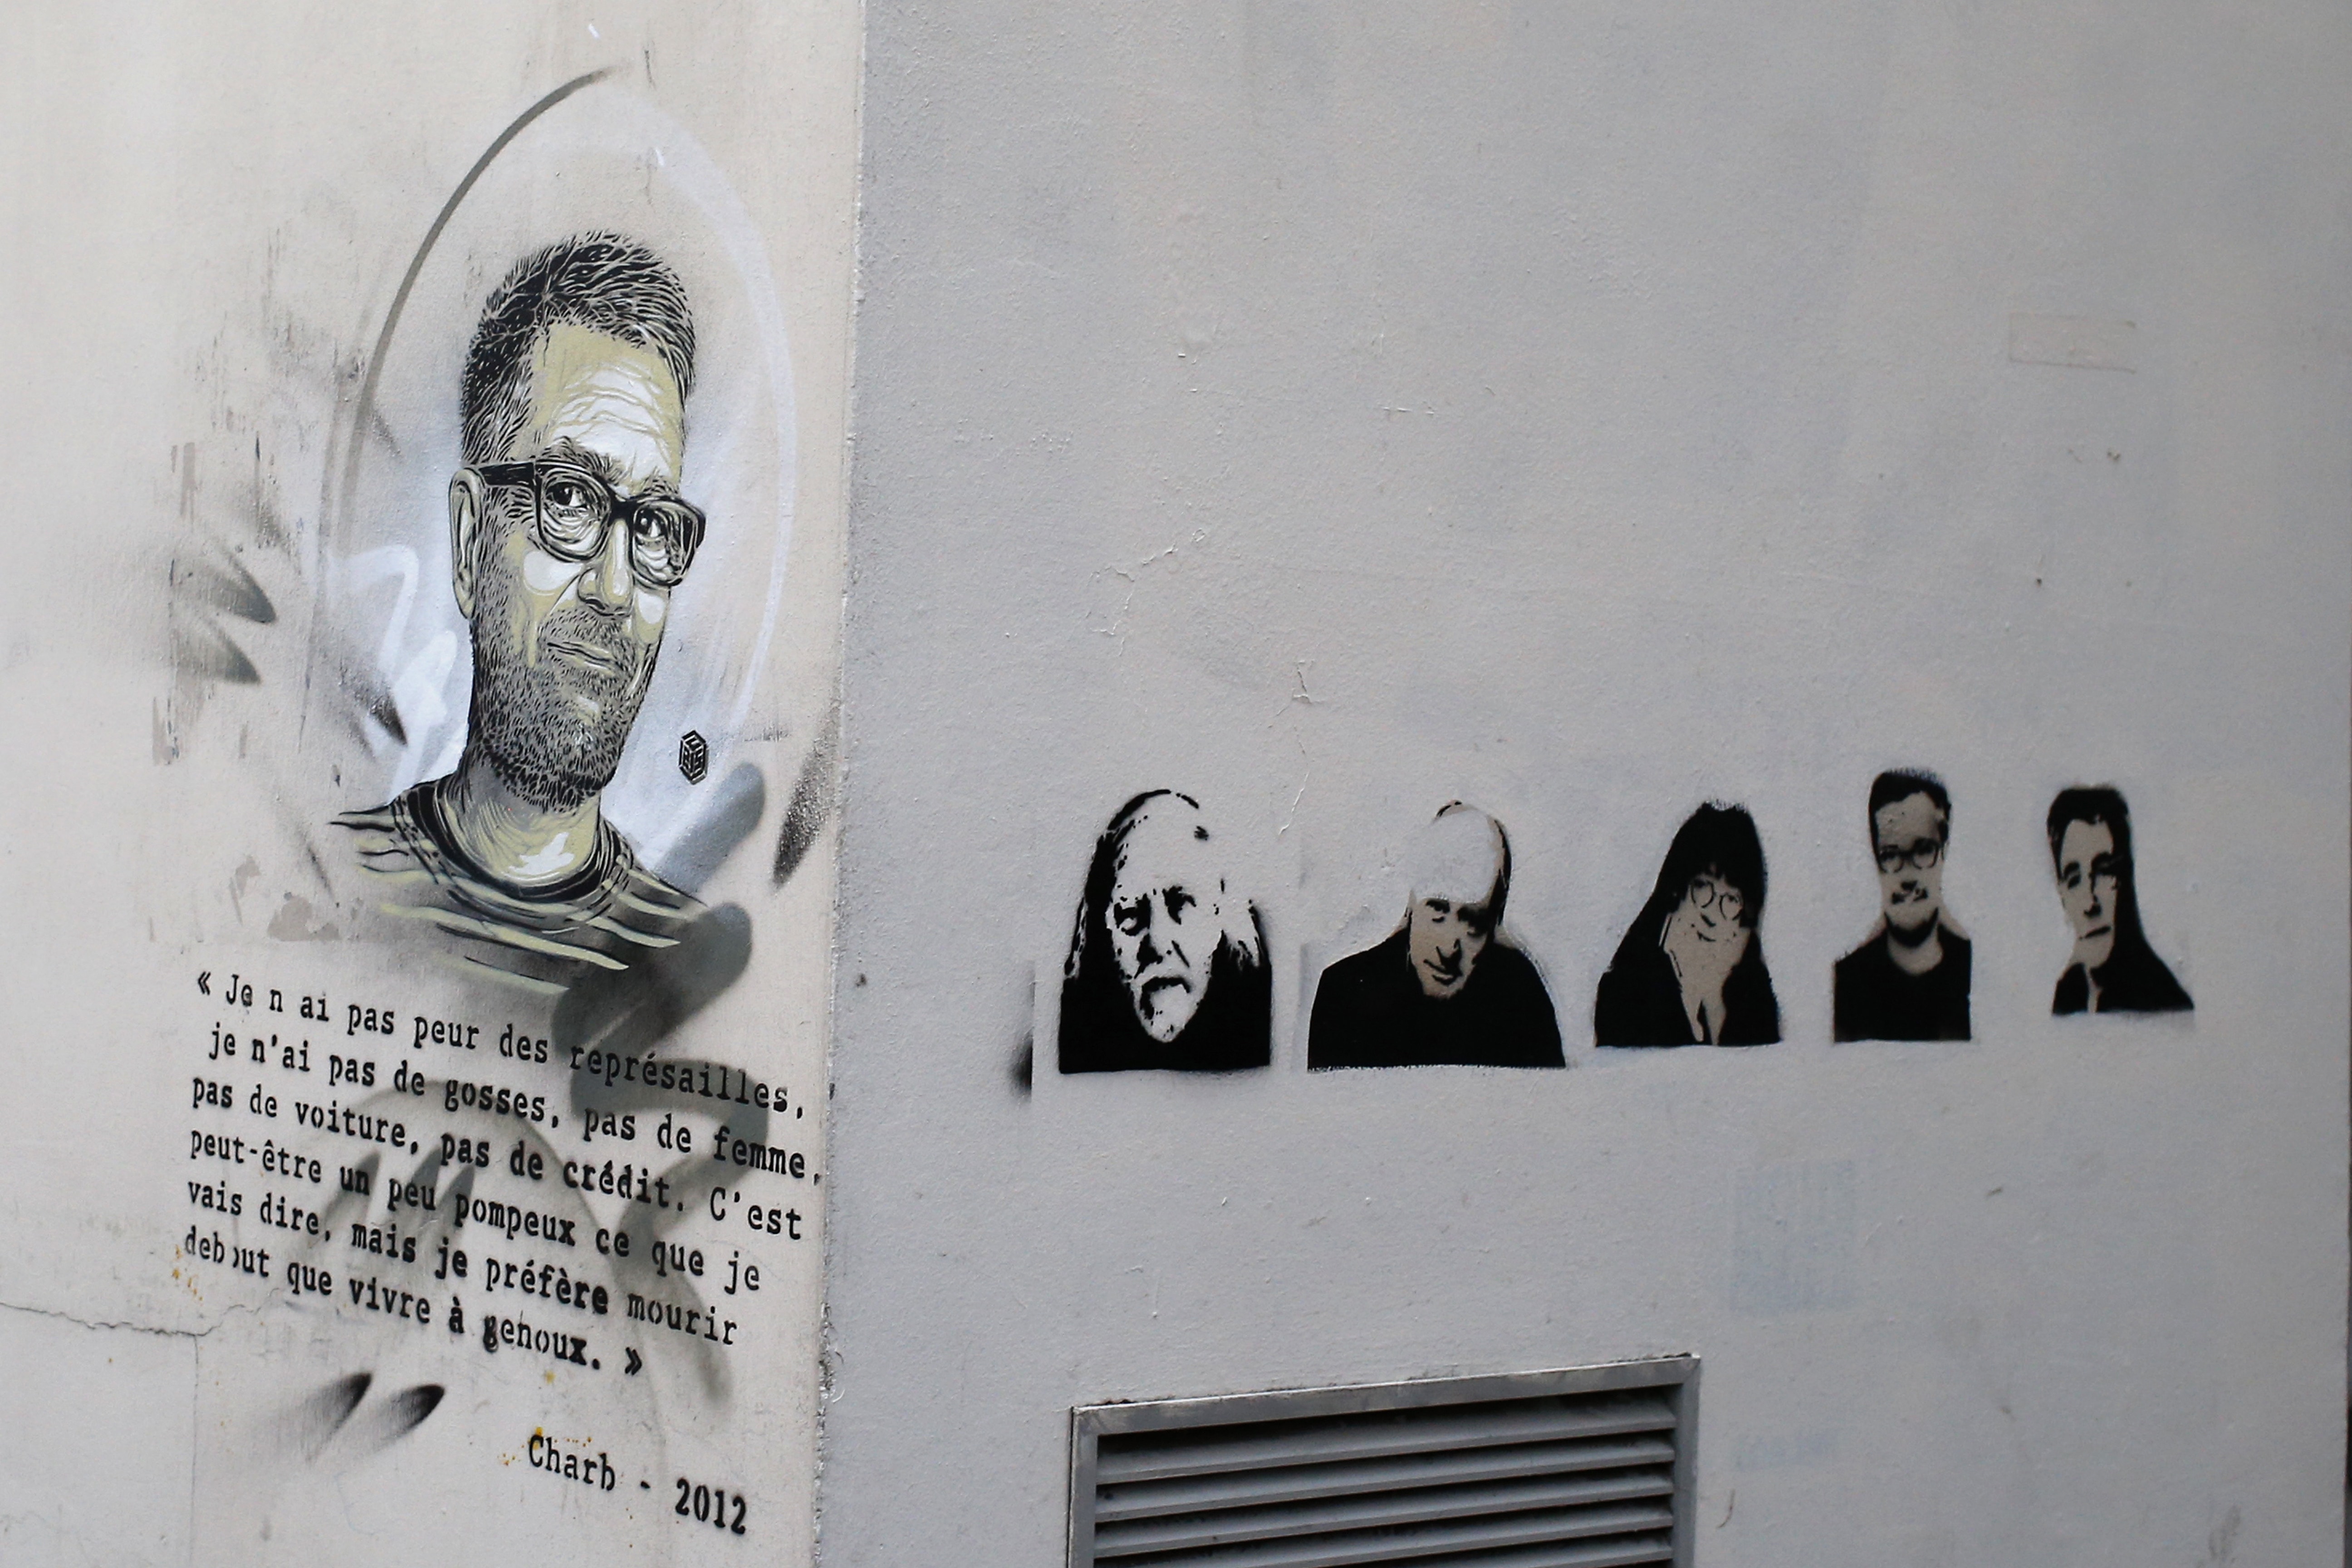 A painting of killed cartoonists is seen on a wall outside Charlie Hebdo's former office in Paris, 7 January 2016, AP Photo/Francois Mori